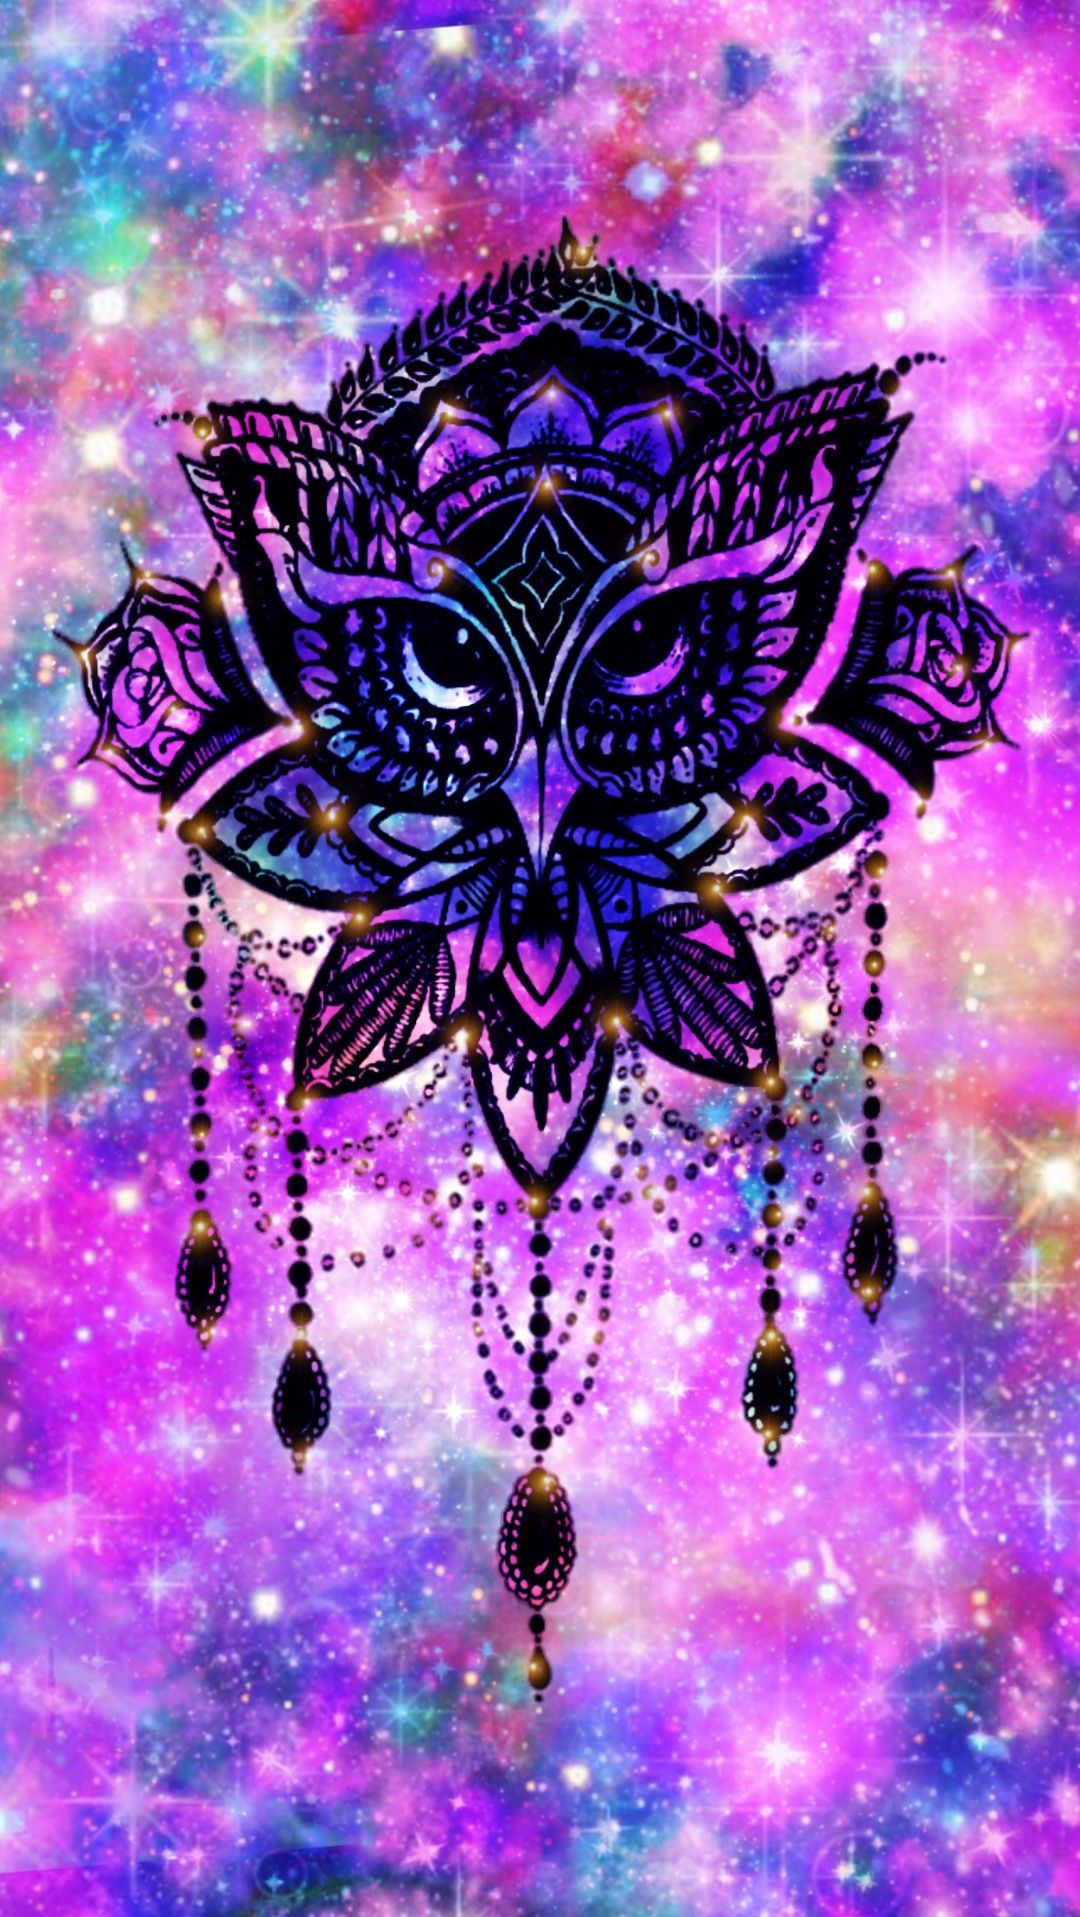 Owl Dreamcatcher Galaxy, made by me #purple #sparkly #wallpaper # background #sparkles #glitter. Galaxy wallpaper, Cool background wallpaper, Glitter wallpaper